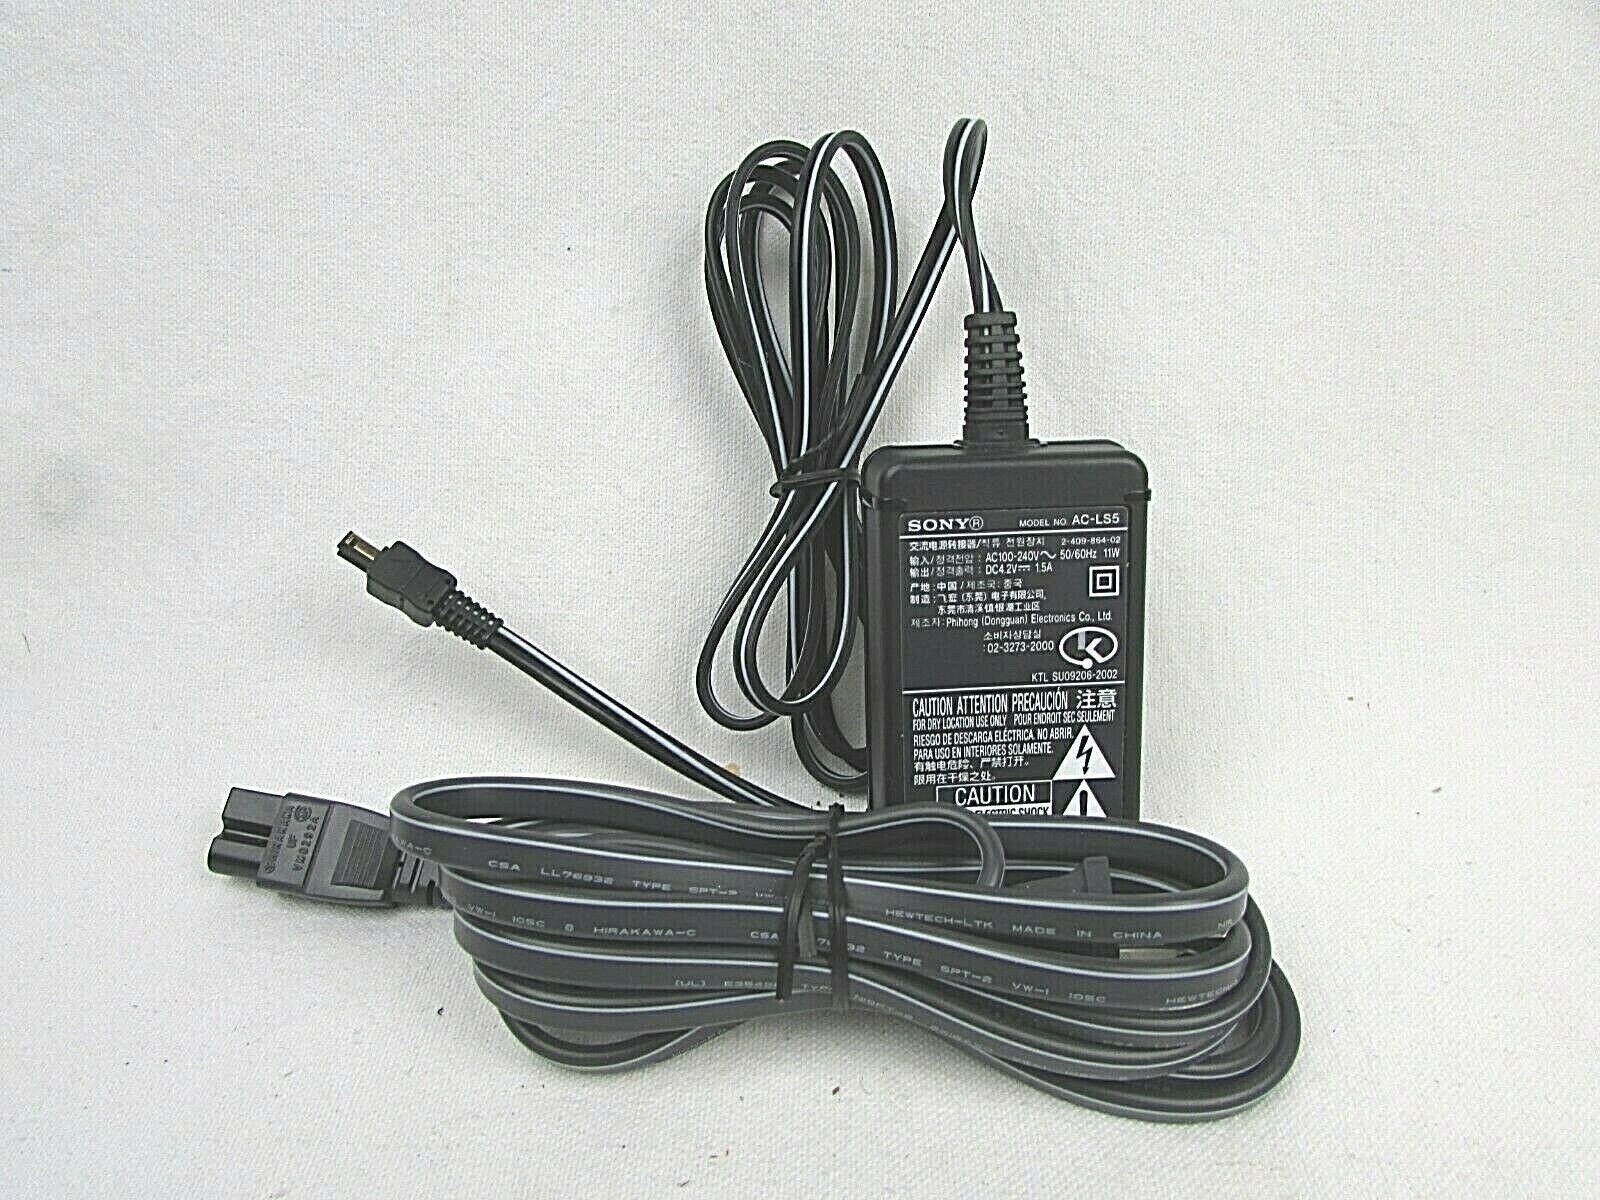 NEW SONY Cyber-Shot DC 4.2V 1.5A AC Adapter Charger AC-LS5 Power supply